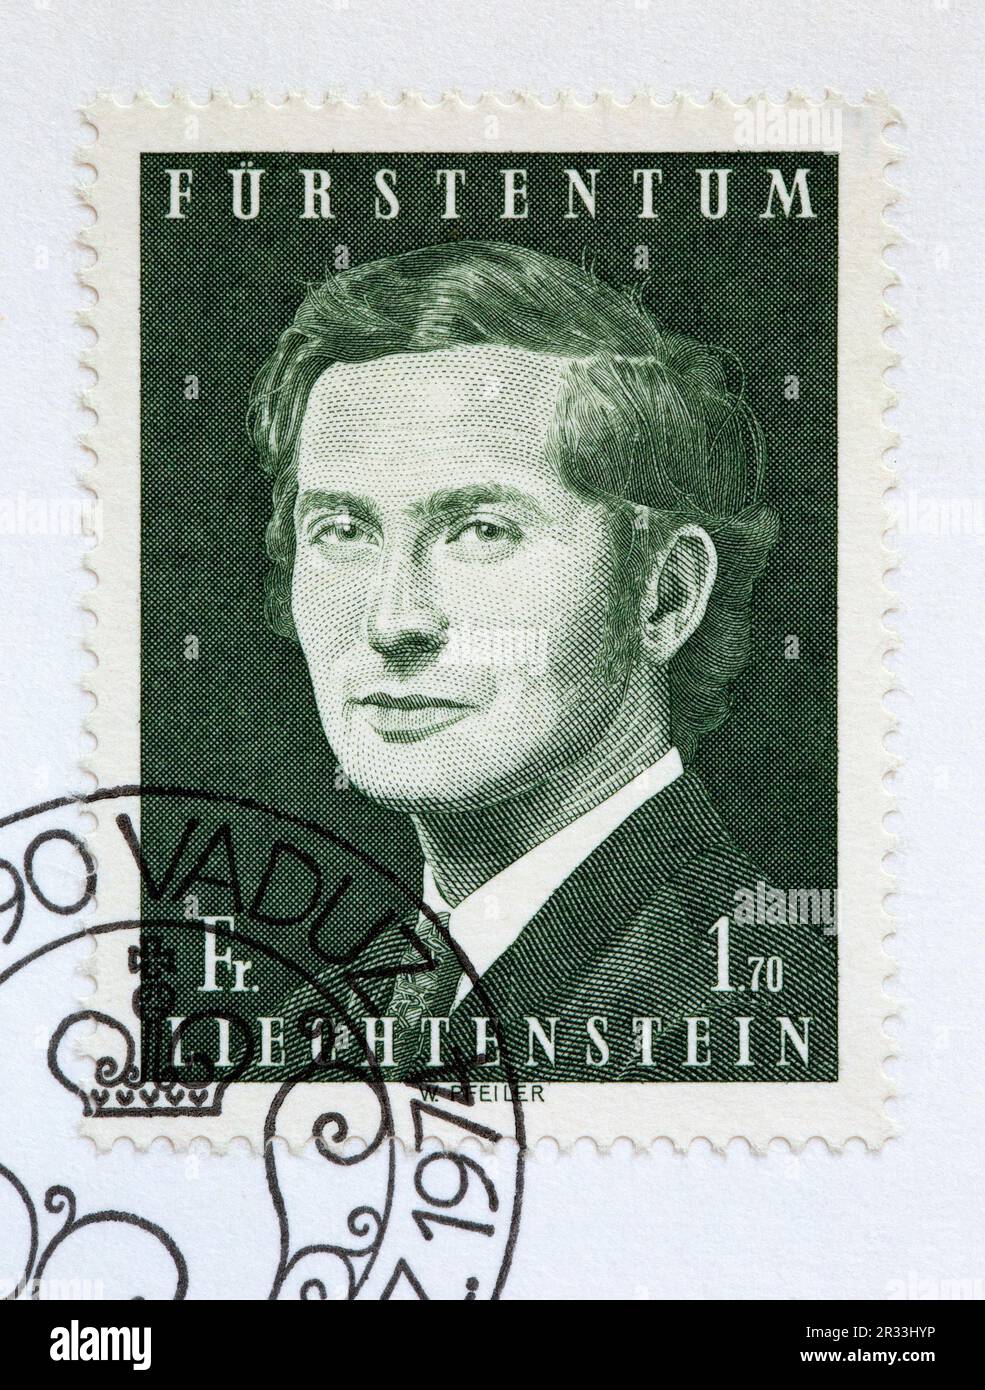 First day of issue cover postage stamp with a portrait of Prince Hans-Adam II of Liechtenstein and a cancellation mark of December 5, 1974, Vaduz. Stock Photo